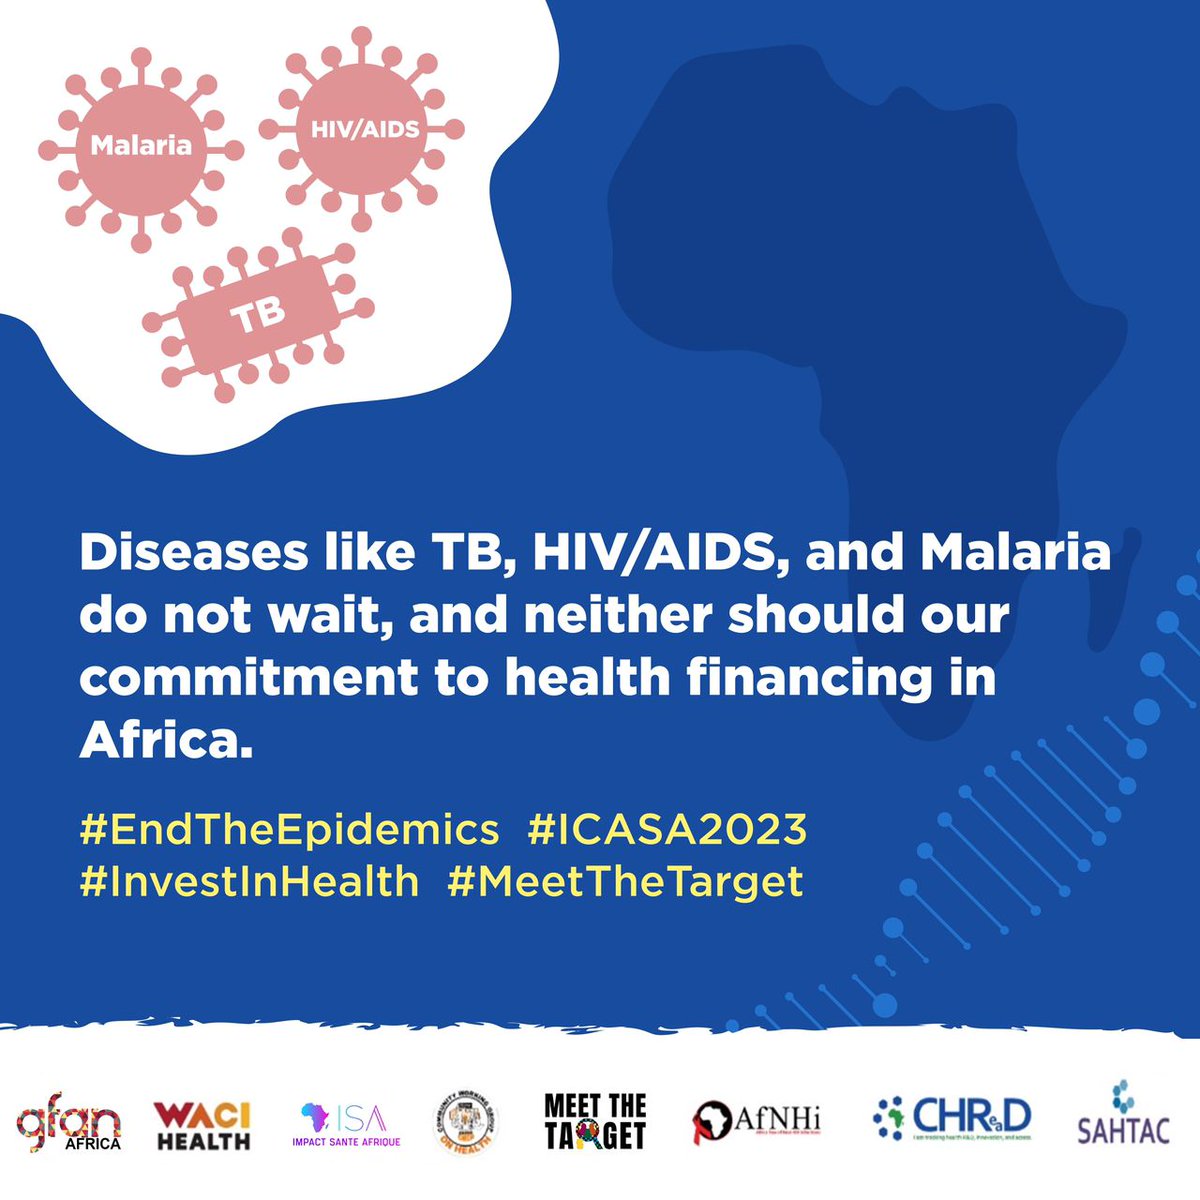 @CWGH1 @GlobalFund @CHReaDKenya @SAHTACtweets @GFAN_Africa @AfNHi_Tweets @WACIHealth @Fahe_K @QueerSpacKe @WanjikuMerci @Gloriamululu @jngangaaa @its_qario @icasa2023 In the face of diseases like TB, HIV/AIDS, and Malaria that show no patience, let's stand united in our dedication to health financing in Africa.
#EndTheEpidemics #ICASA2023 #InvestInHealth #MeetTheTarget
#HealthForAll 
@GFAN_Africa
 @CWGH1  @GlobalFund @CHReaDKenya @SAHTACtweets